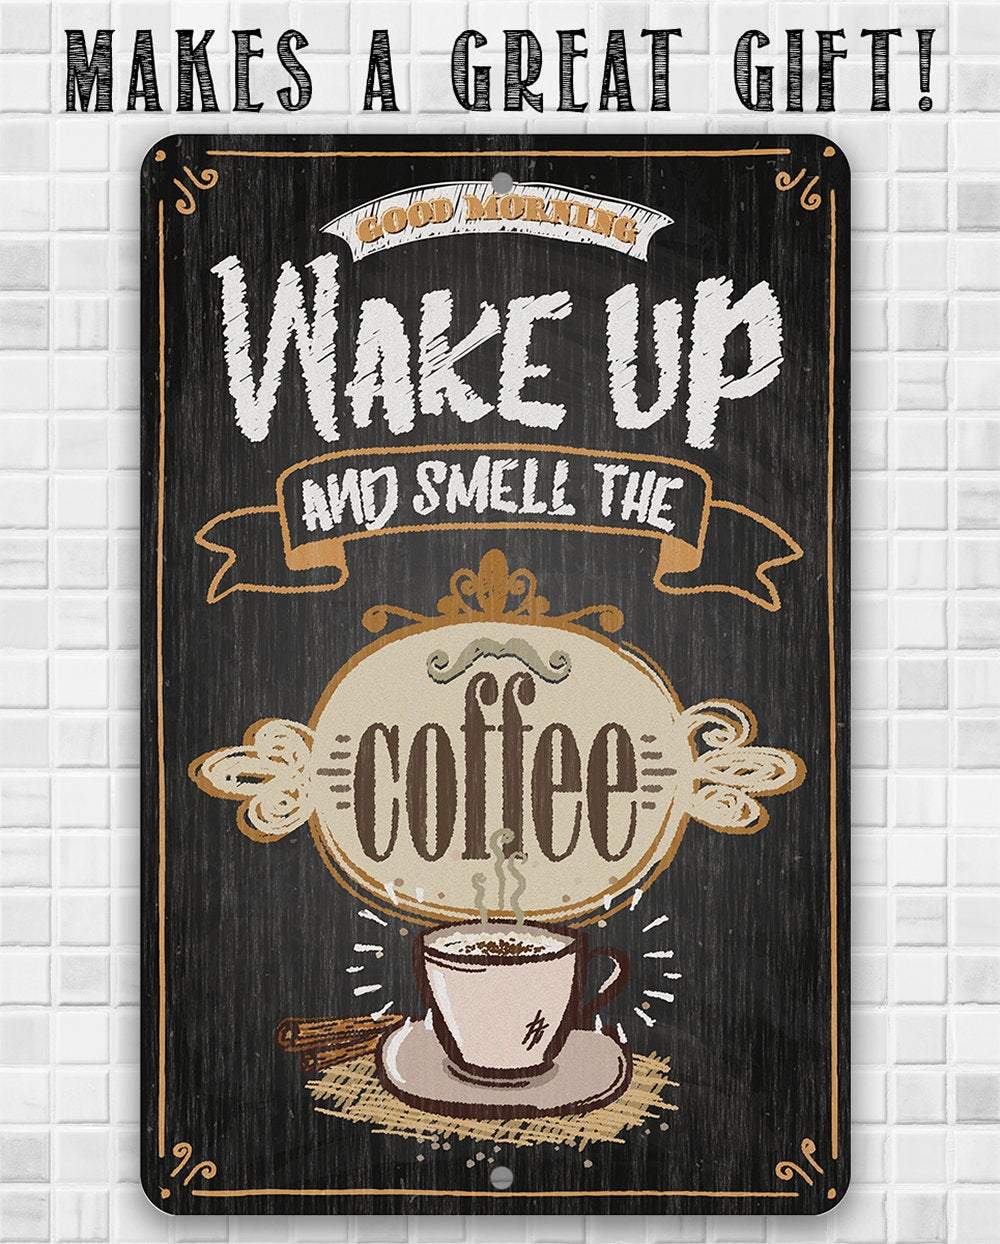 Wake Up and Smell The Coffee - Metal Sign | Lone Star Art.